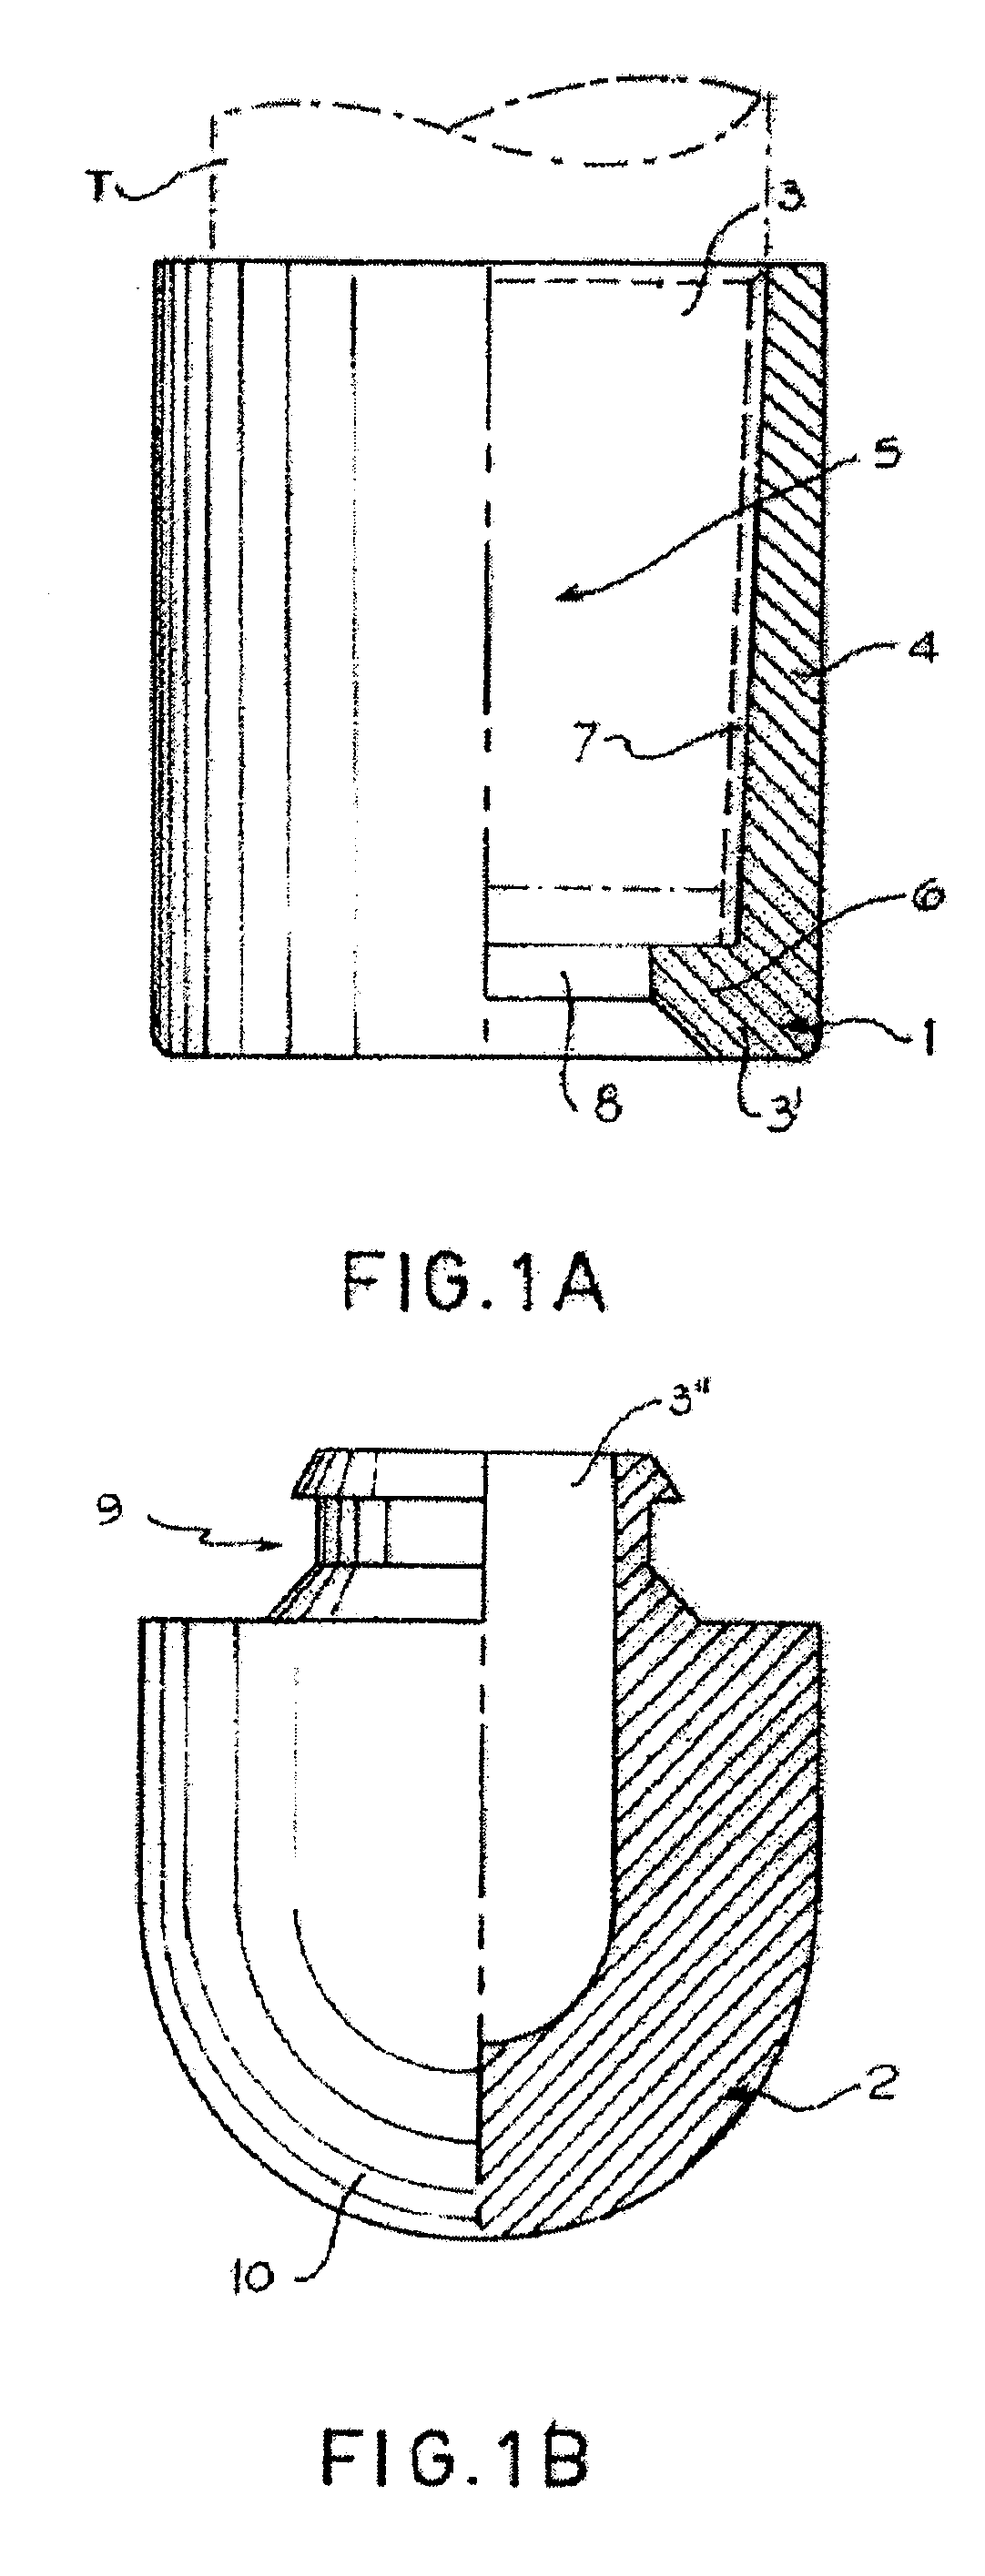 End protector device for tubular structures